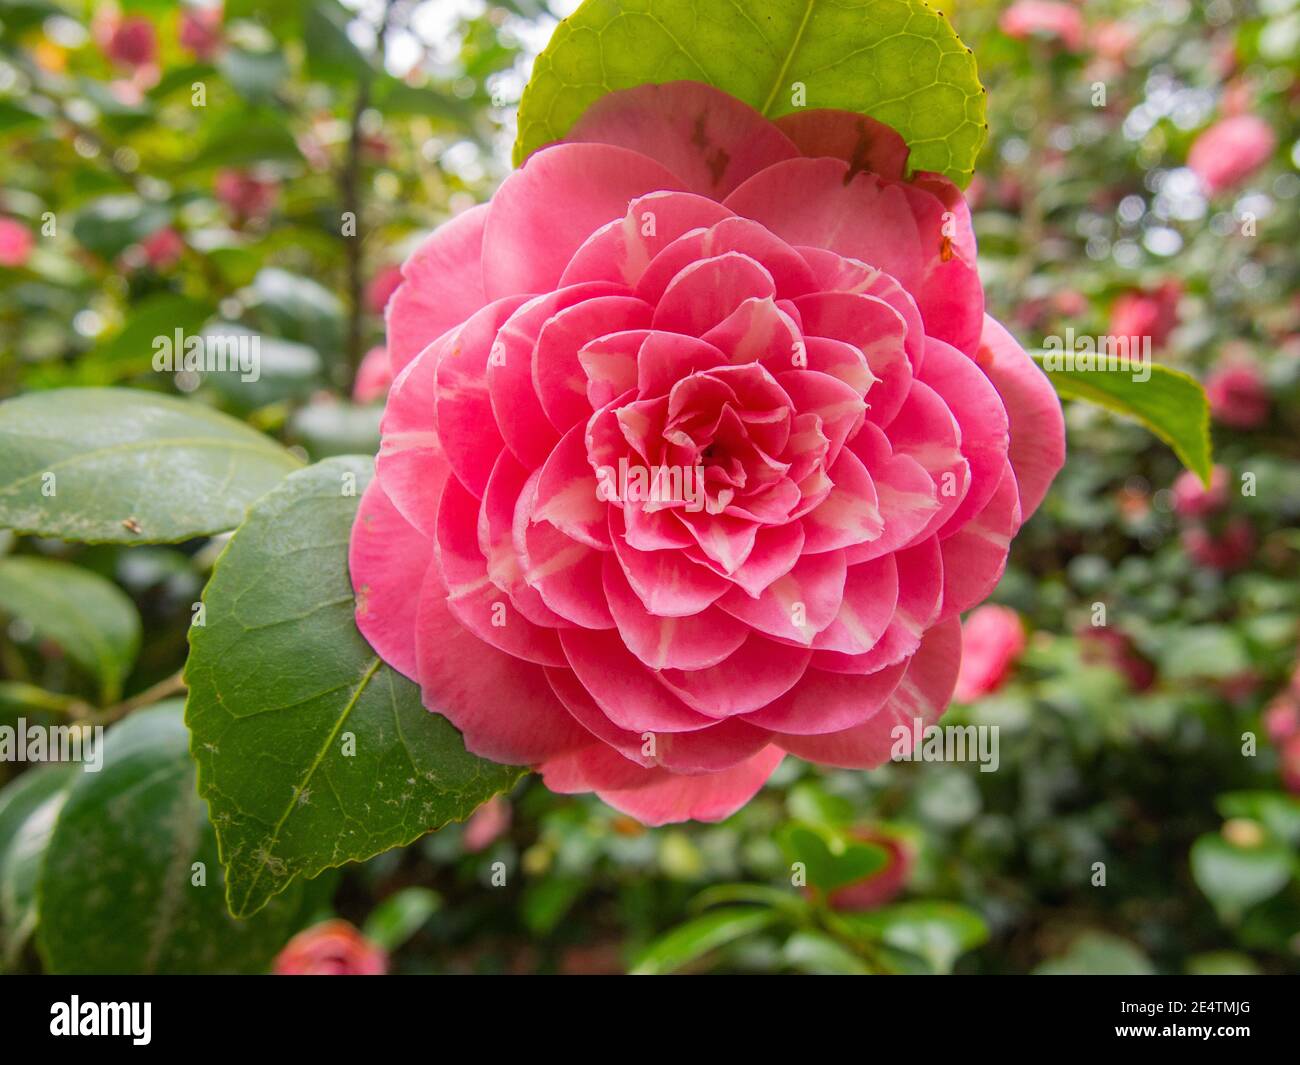 Japanese camellia (Camellia japonica) is one of the best-known species of the genus Camellia. Stock Photo